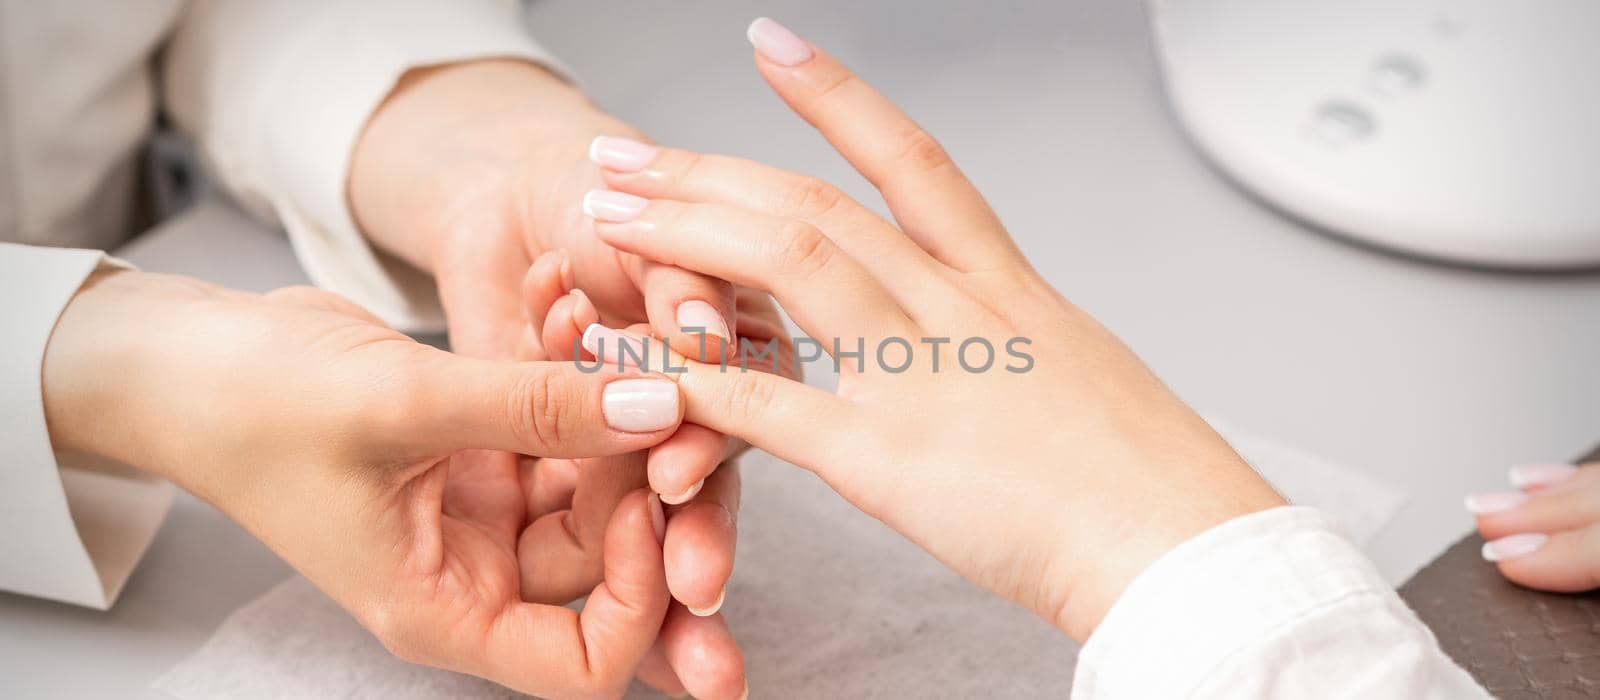 A woman's hand getting a finger massage in a nail salon. Manicure treatment at beauty spa